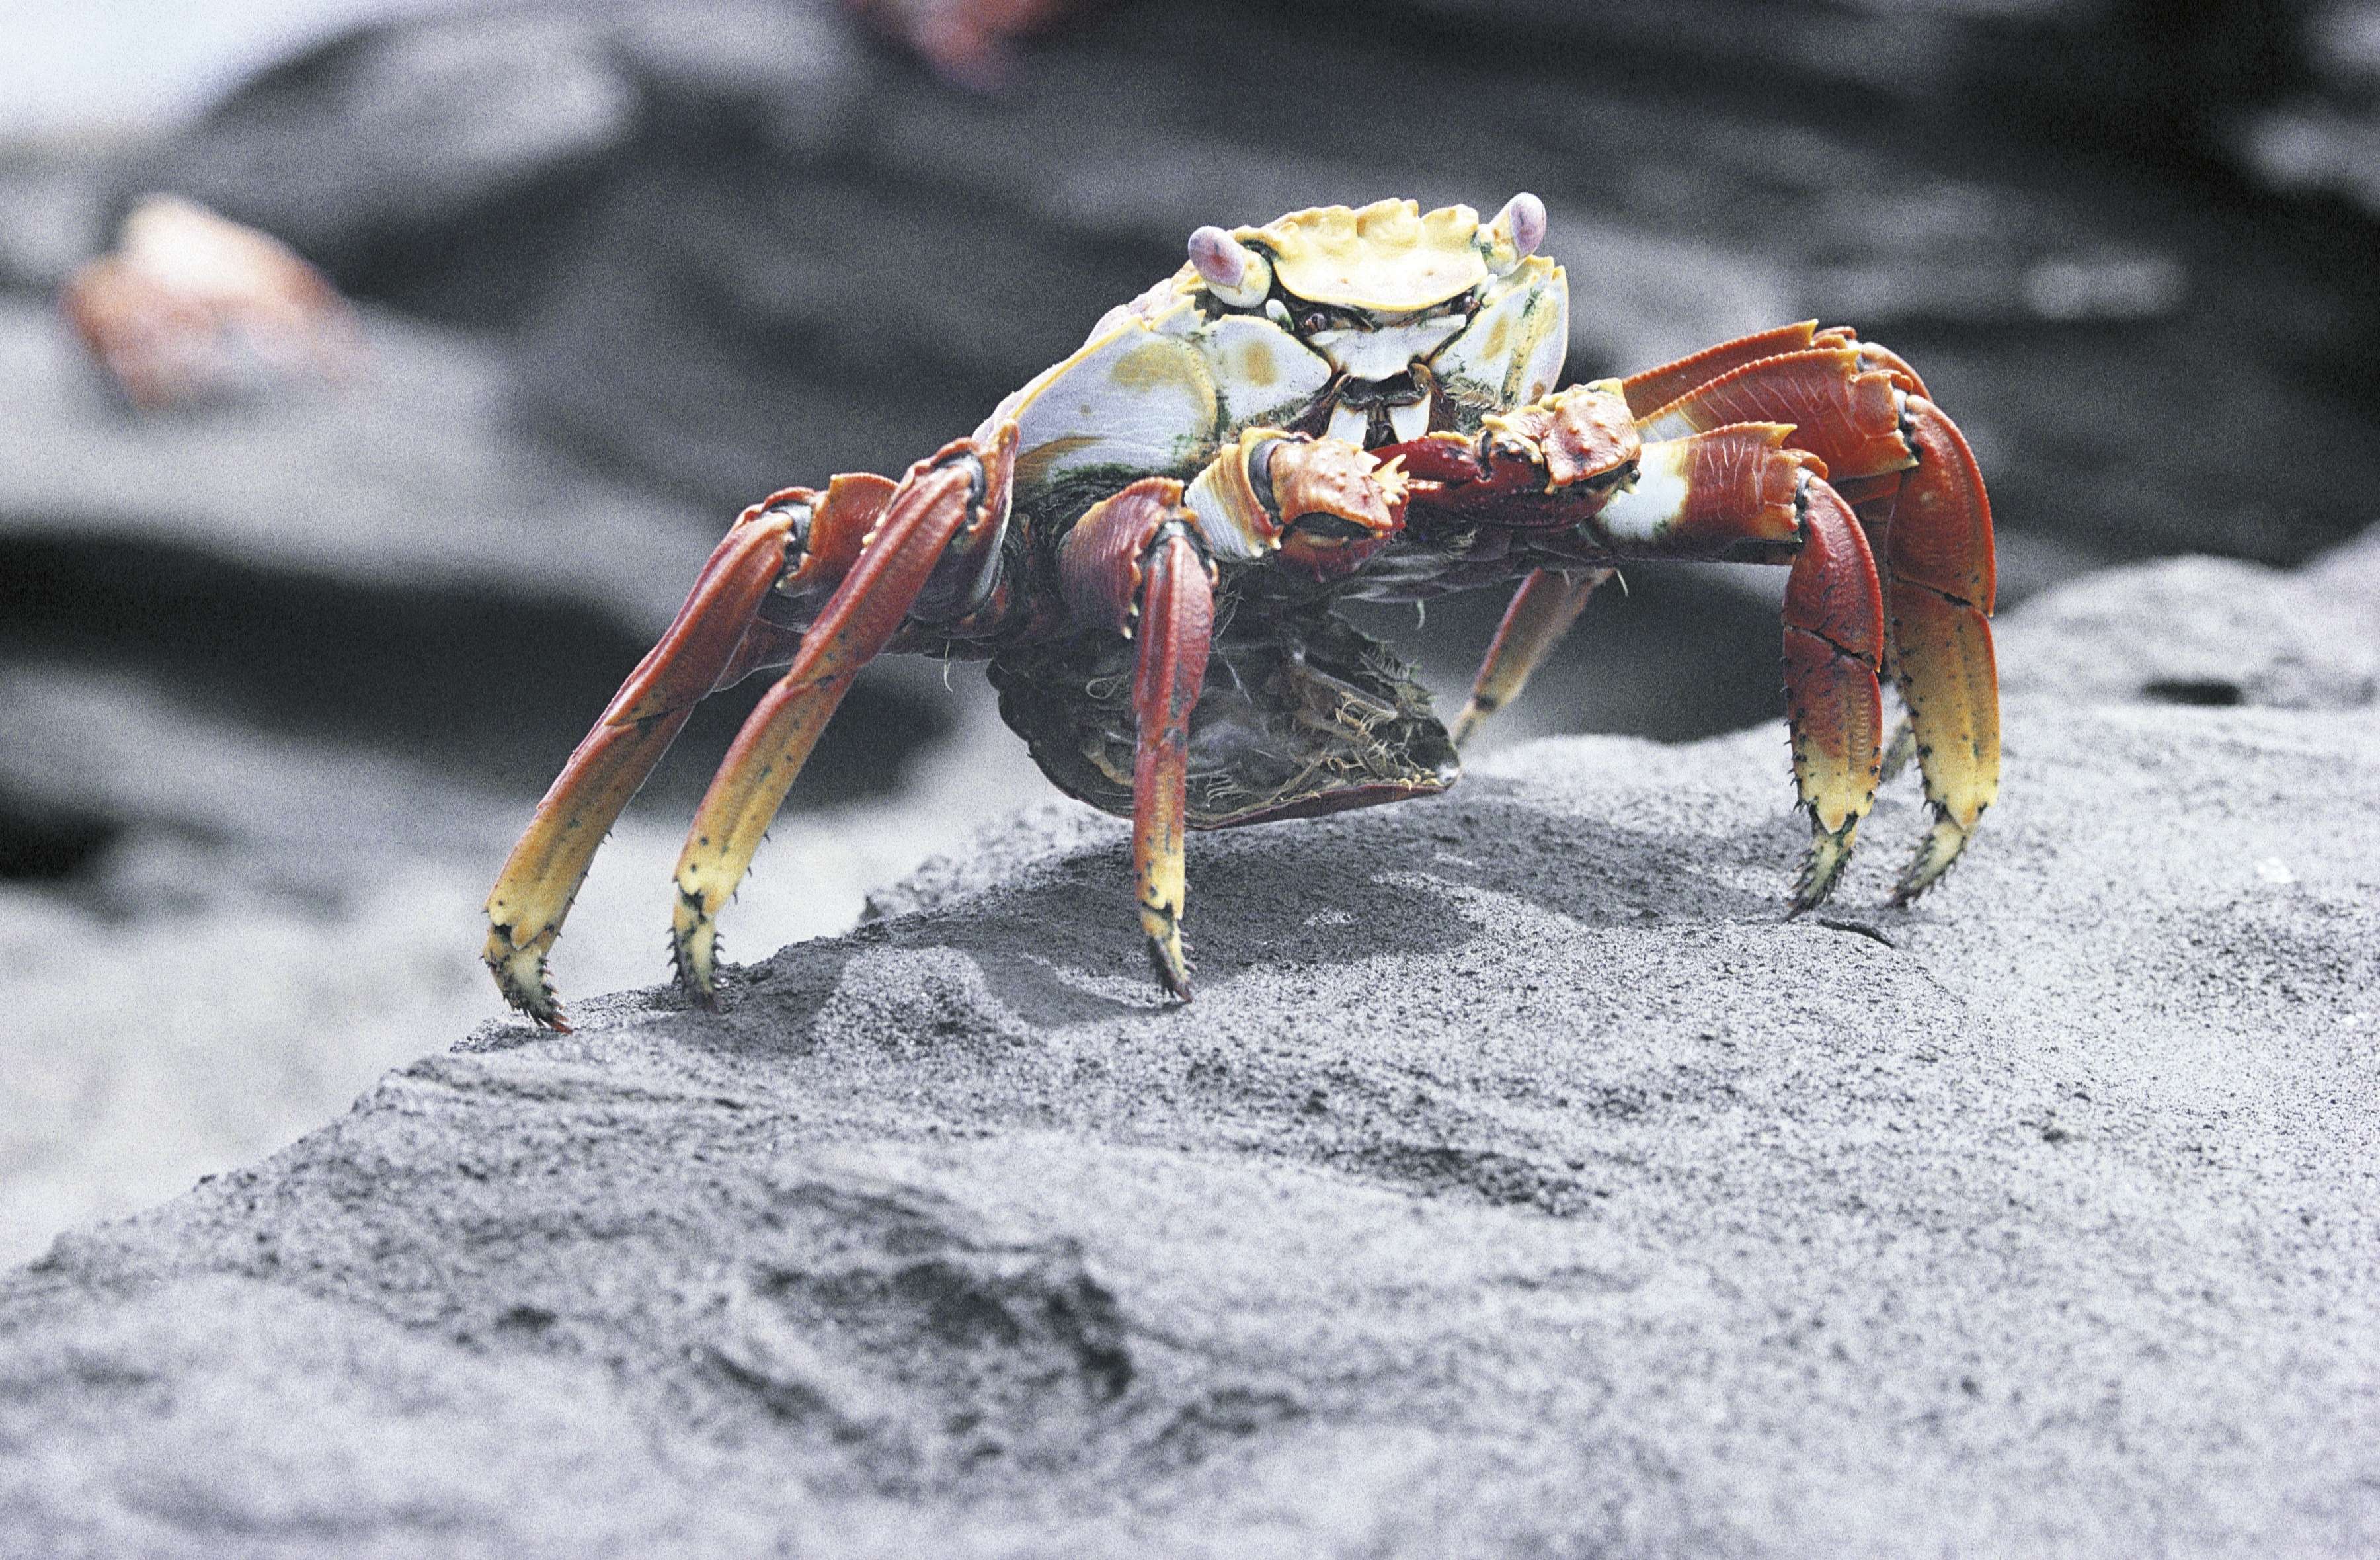 A rock crab in the Galapagos Islands